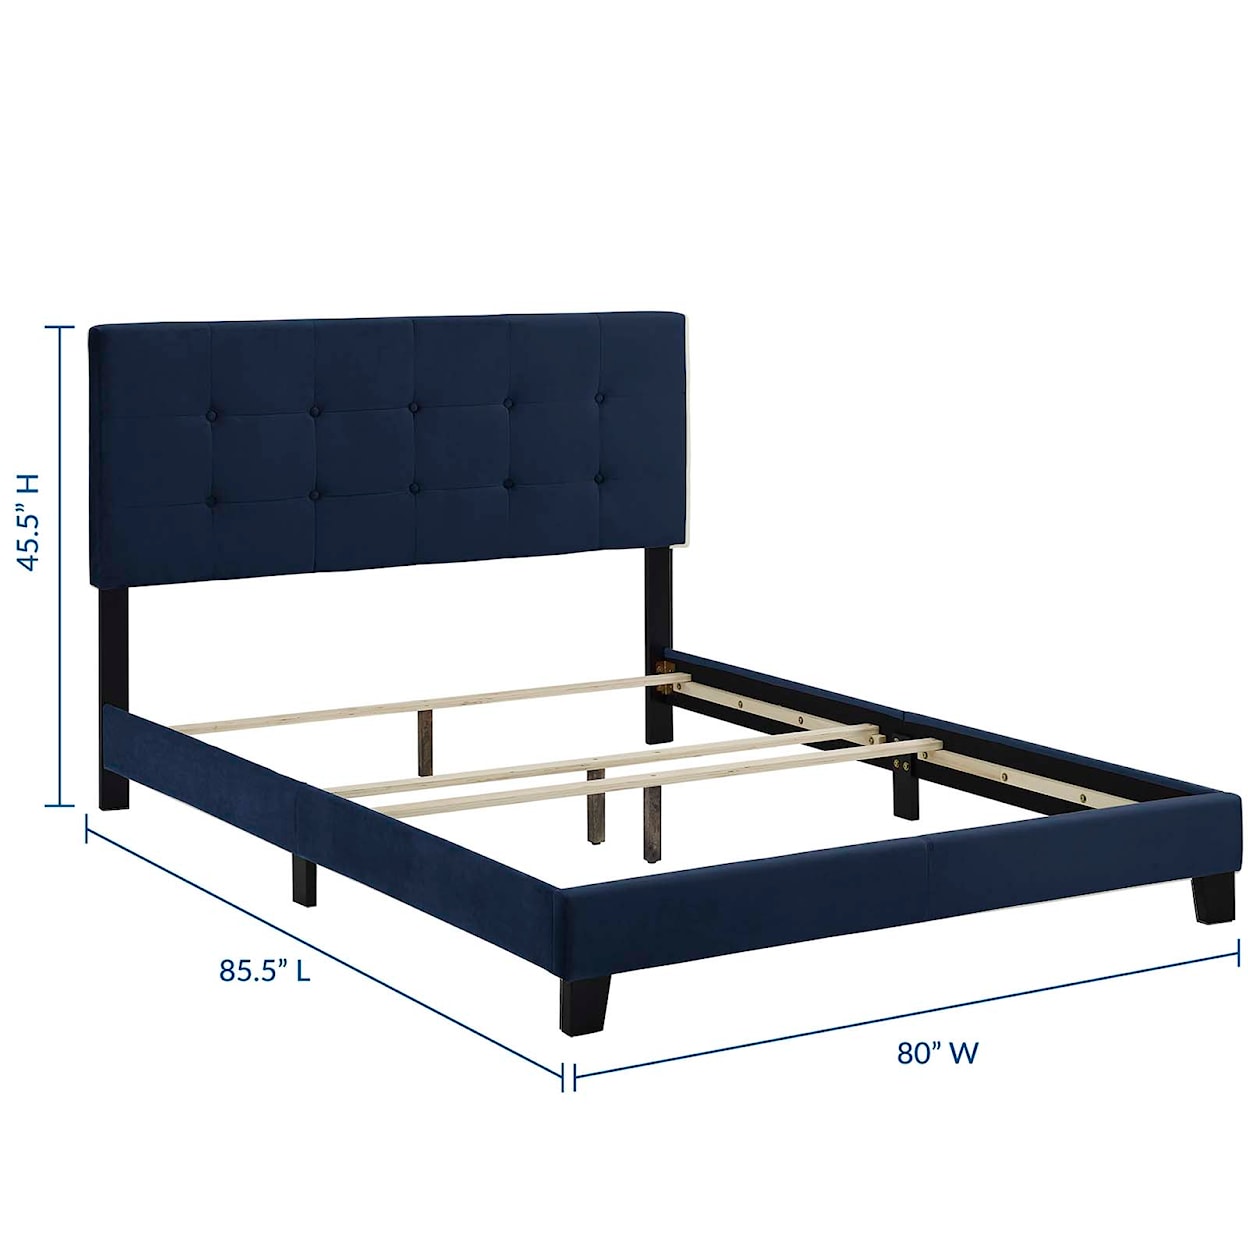 Modway Amira King Bed